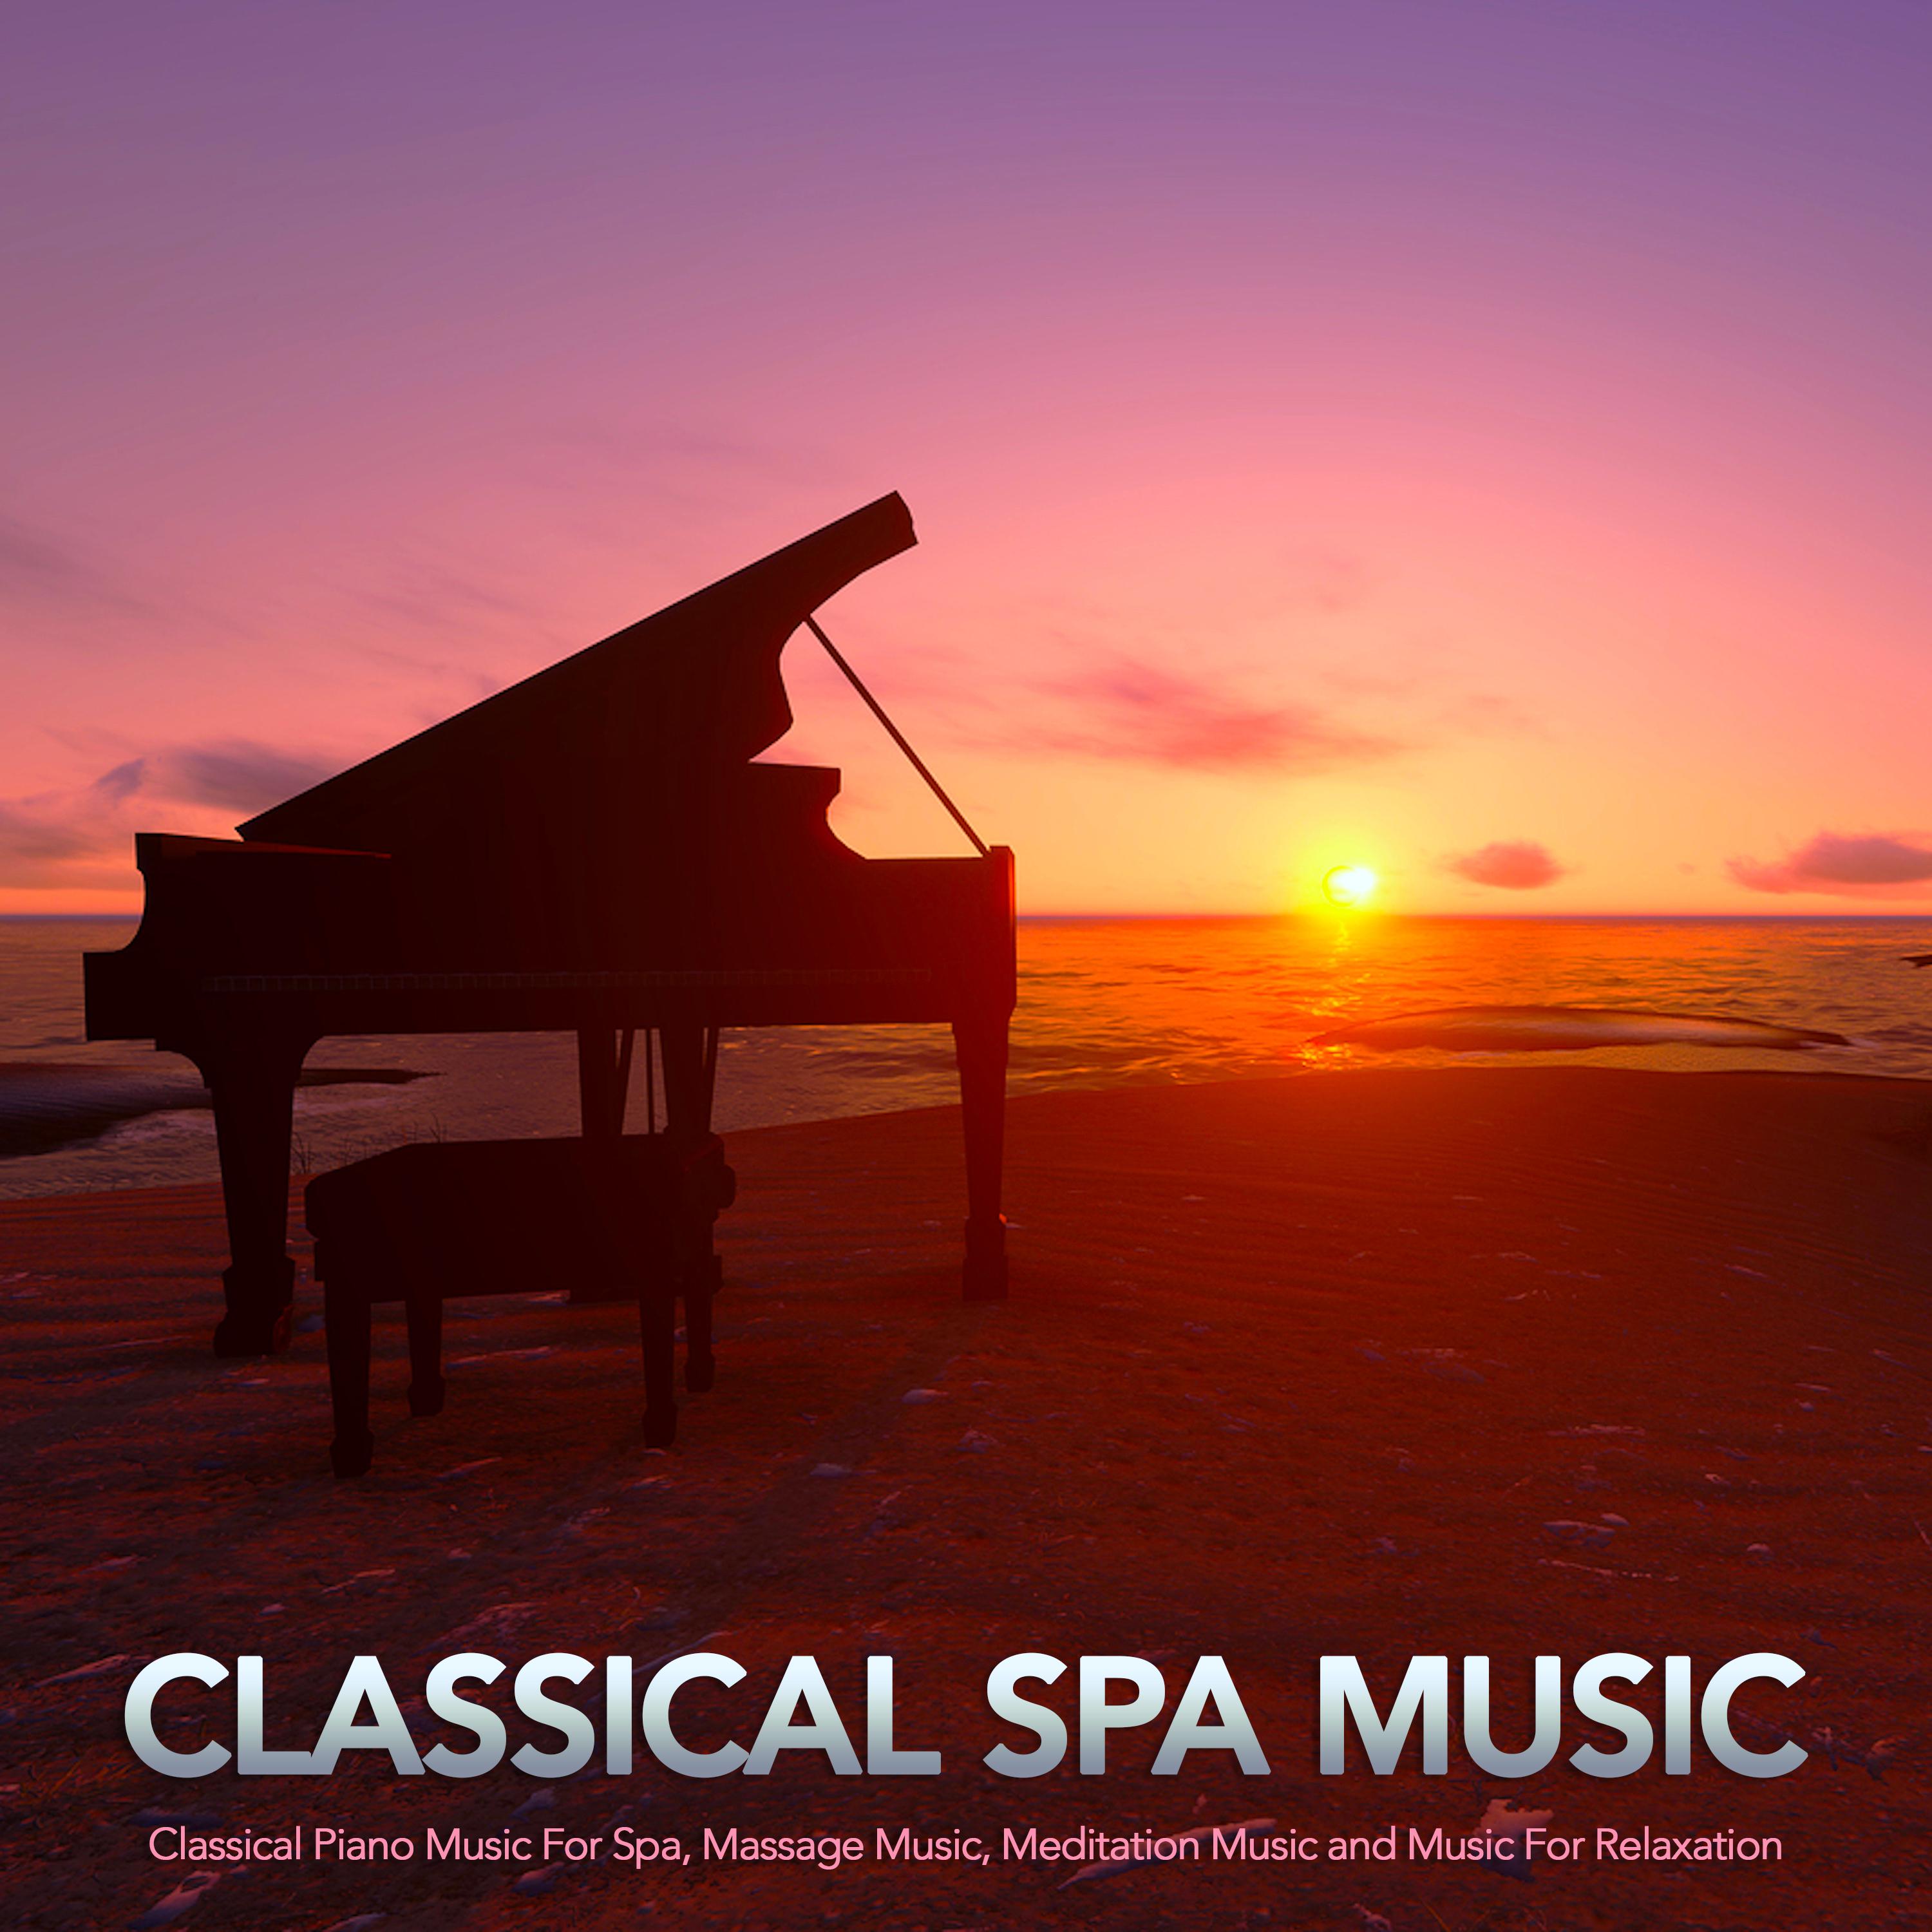 Canon In D - Pachelbel - Classical Piano Music - Spa Music